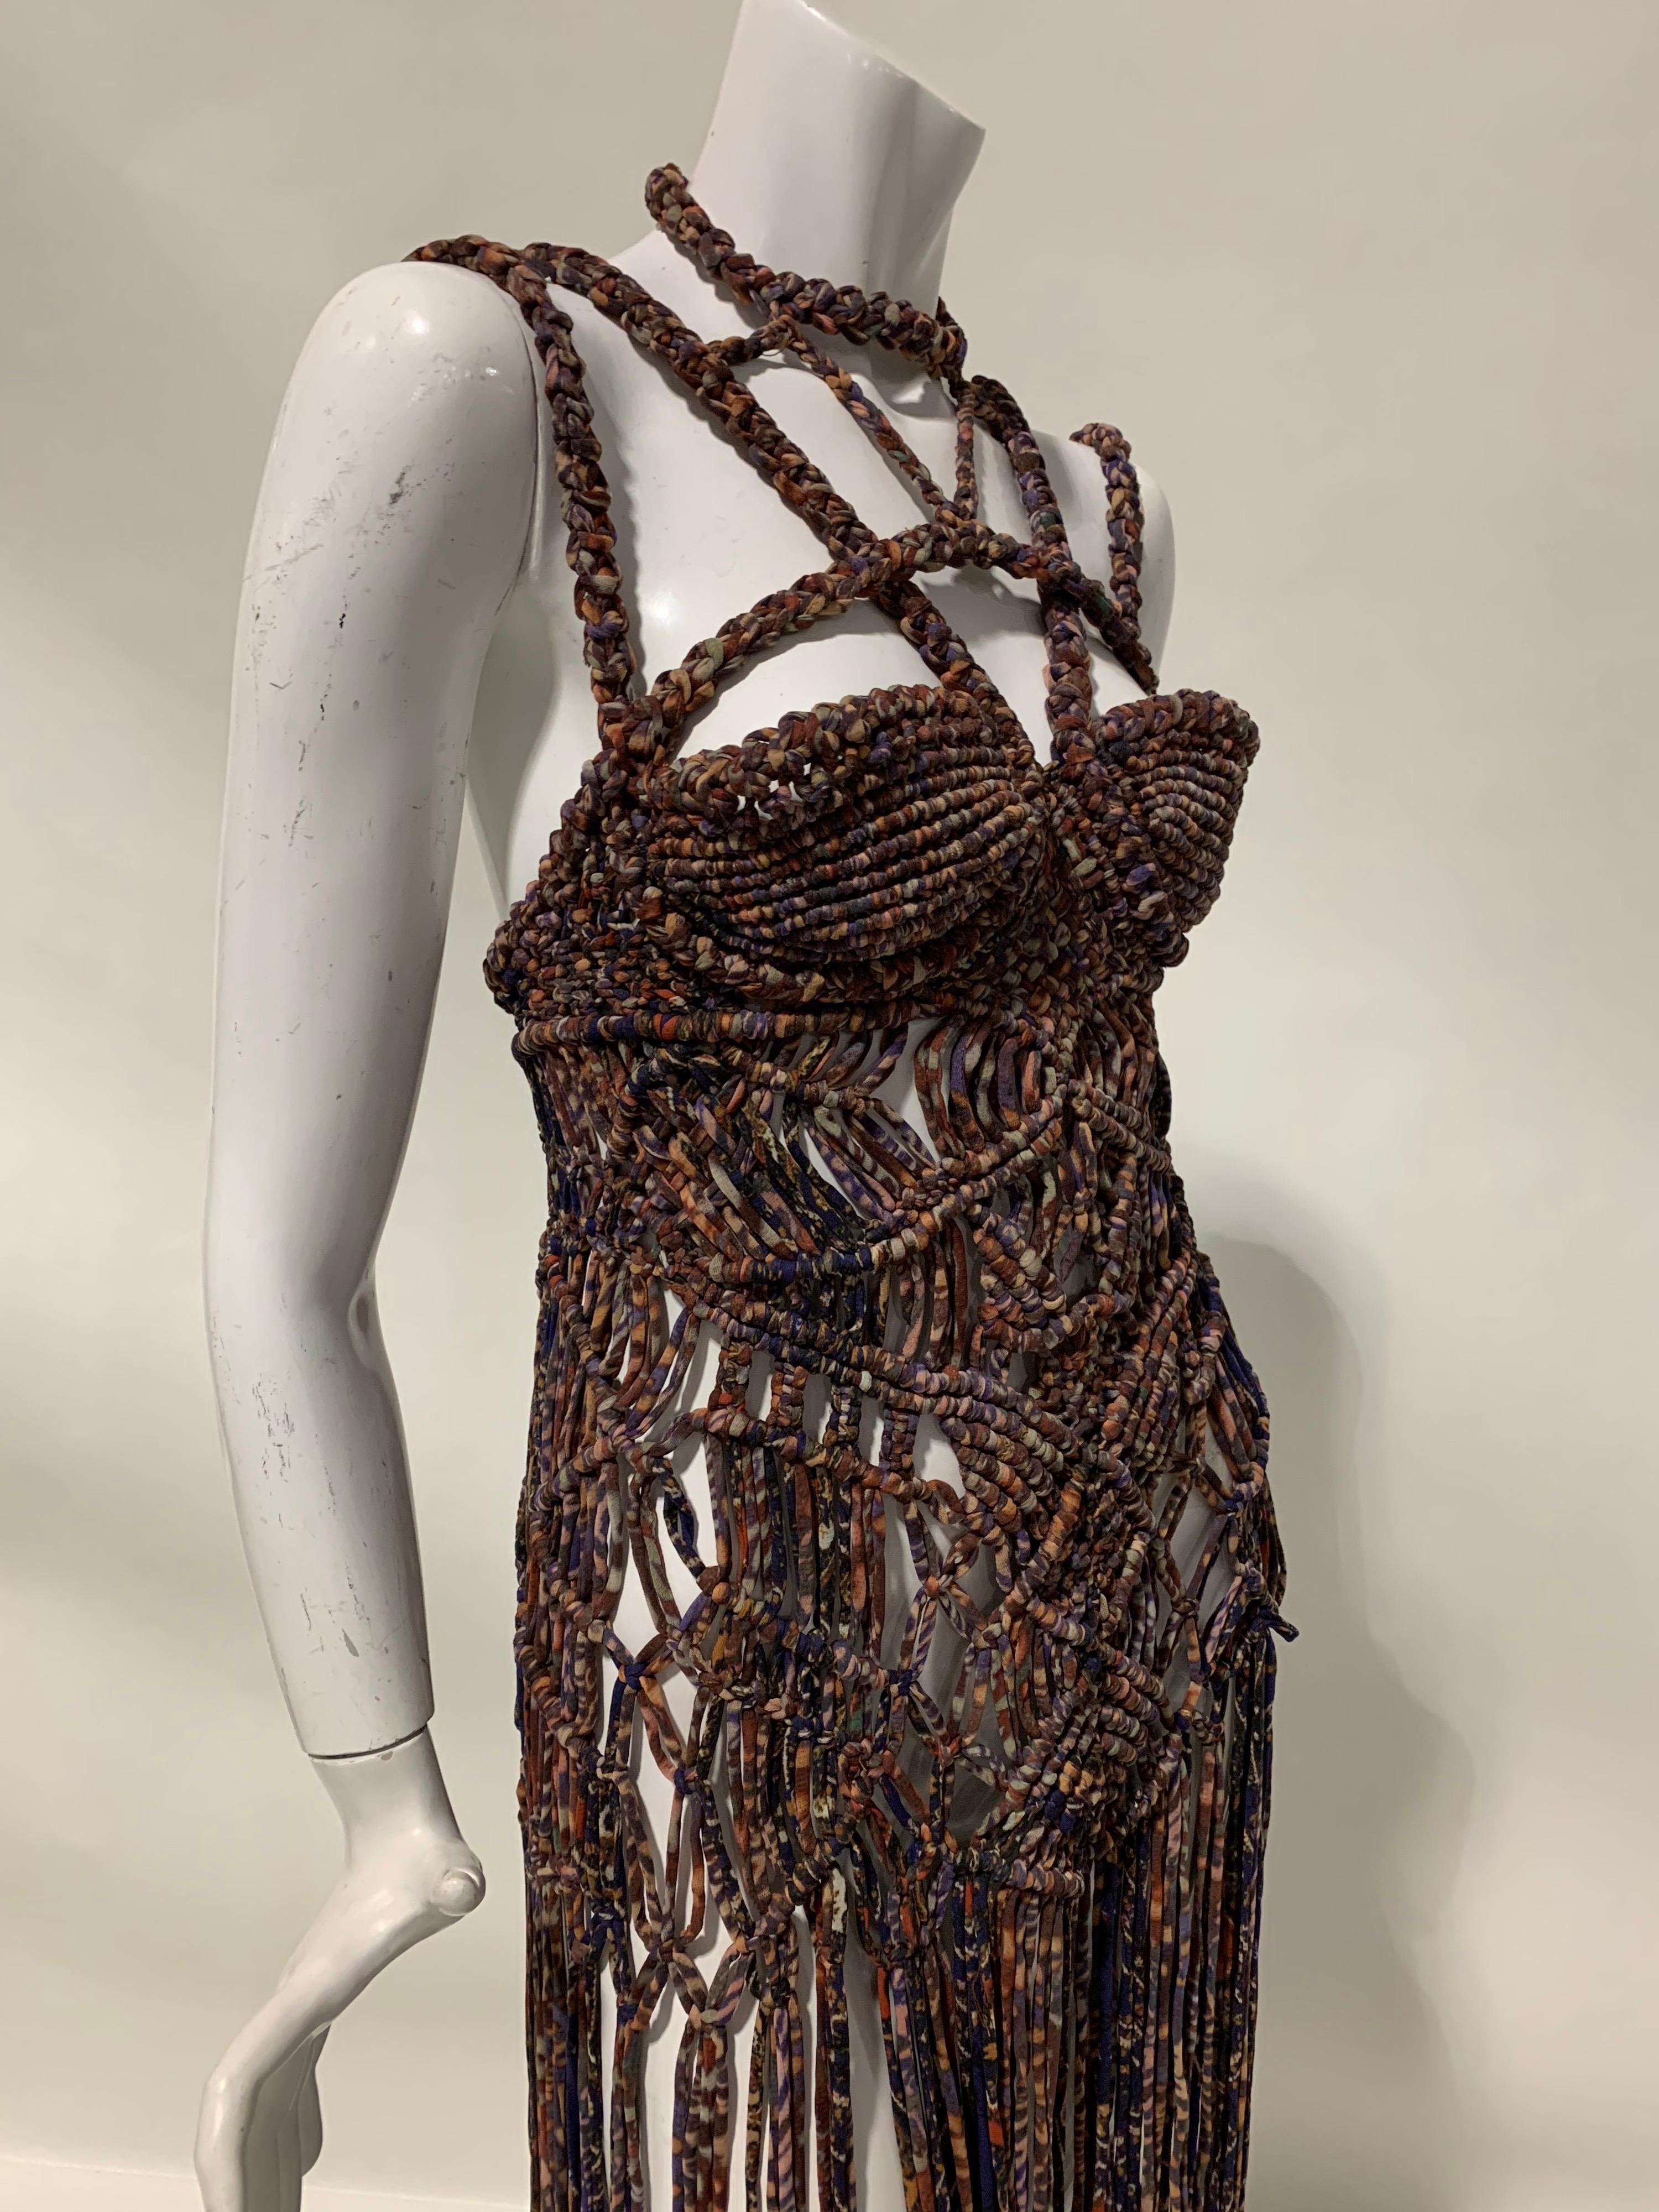 Torso Creations “Ibiza” Macrame Gown W/ Sculpted Bodice & Fringe  For Sale 2